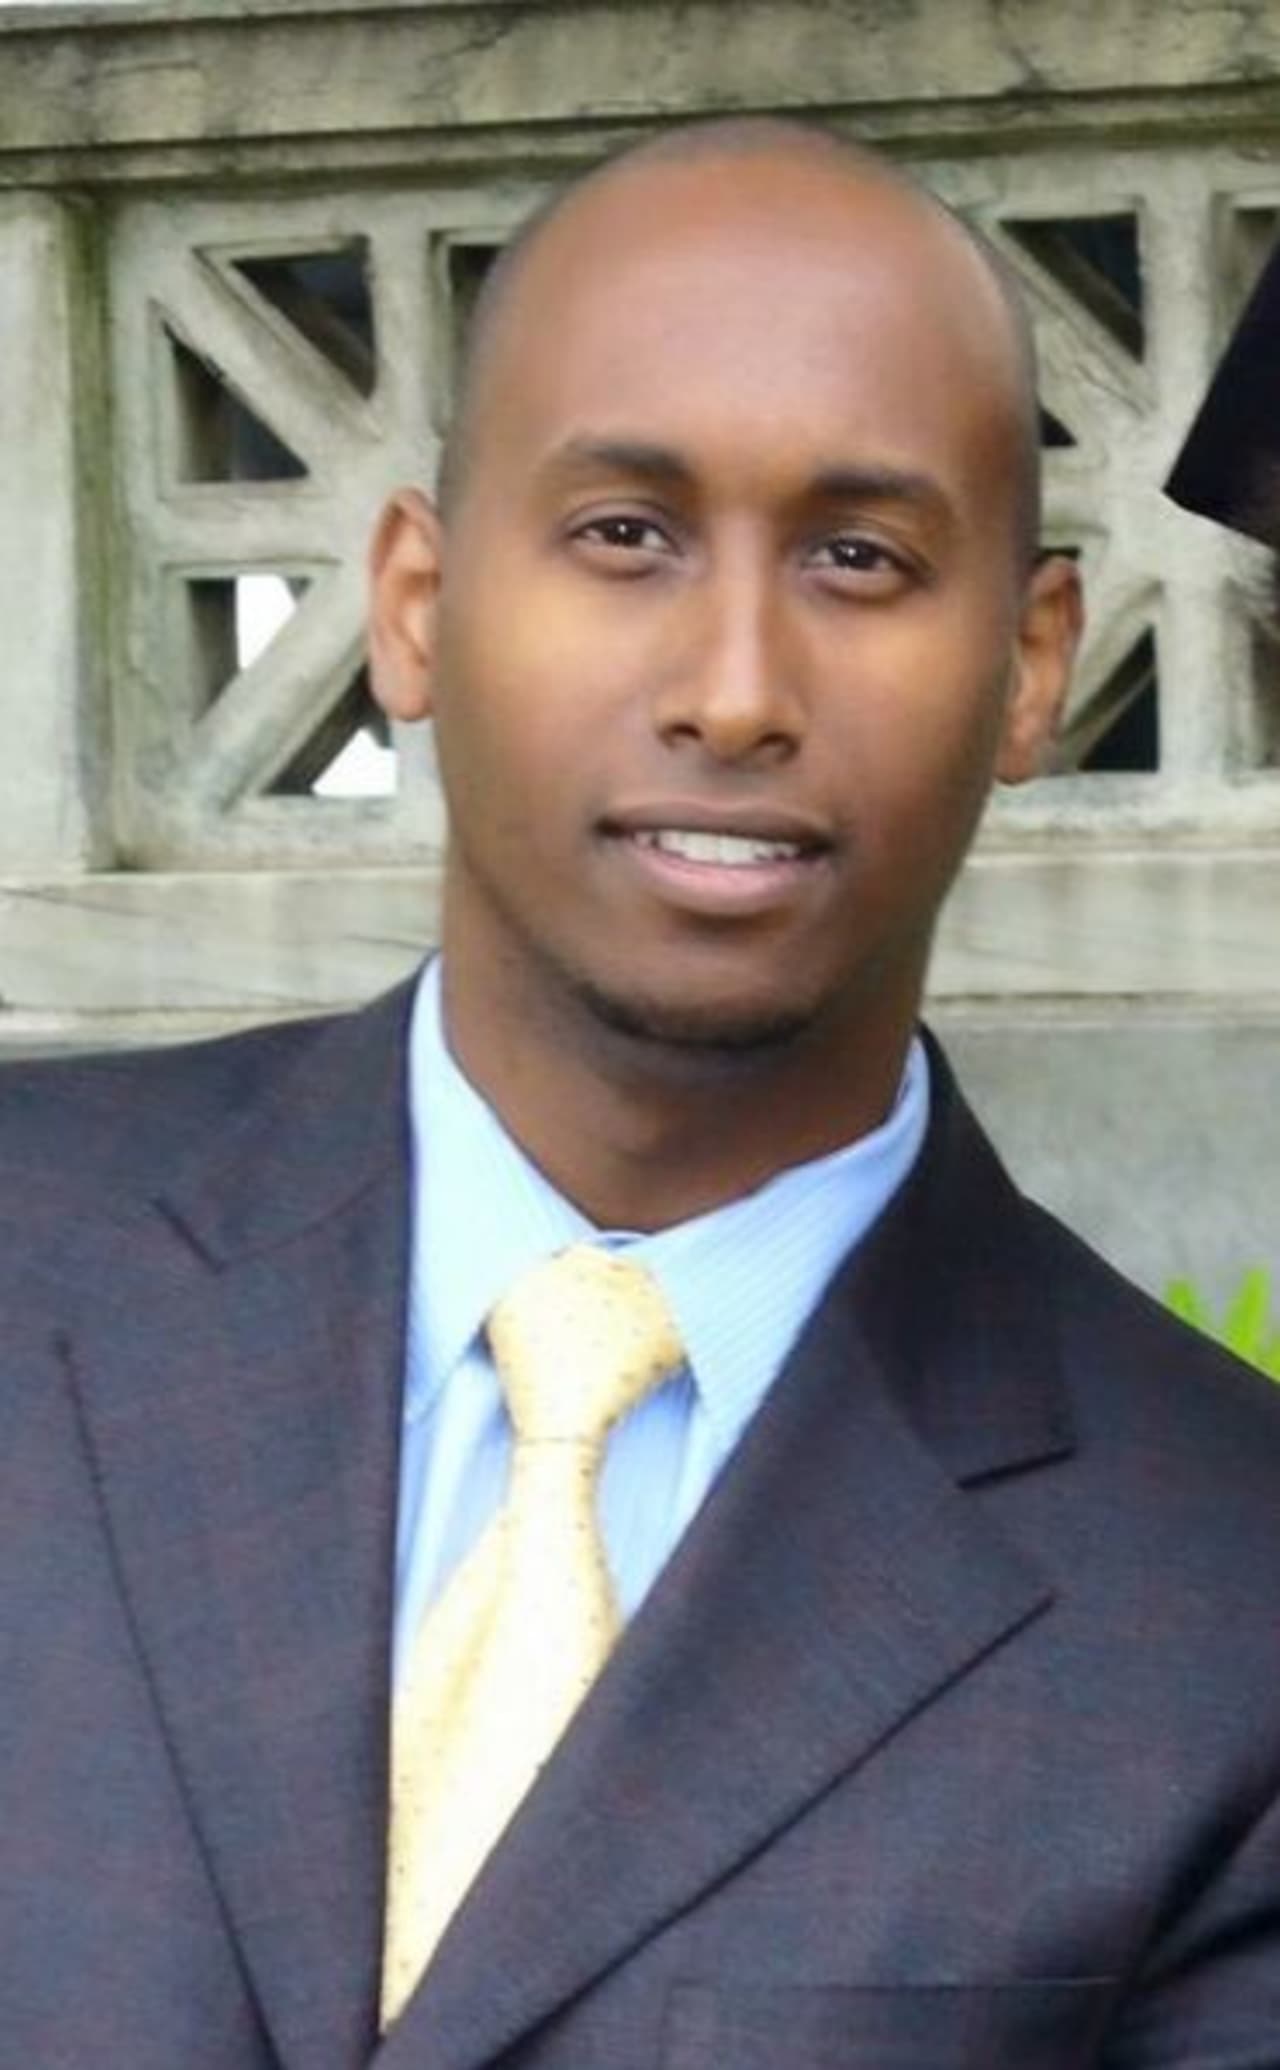 The family of Gugsa Abraham "Abe" Dabela is suing the town of Redding.